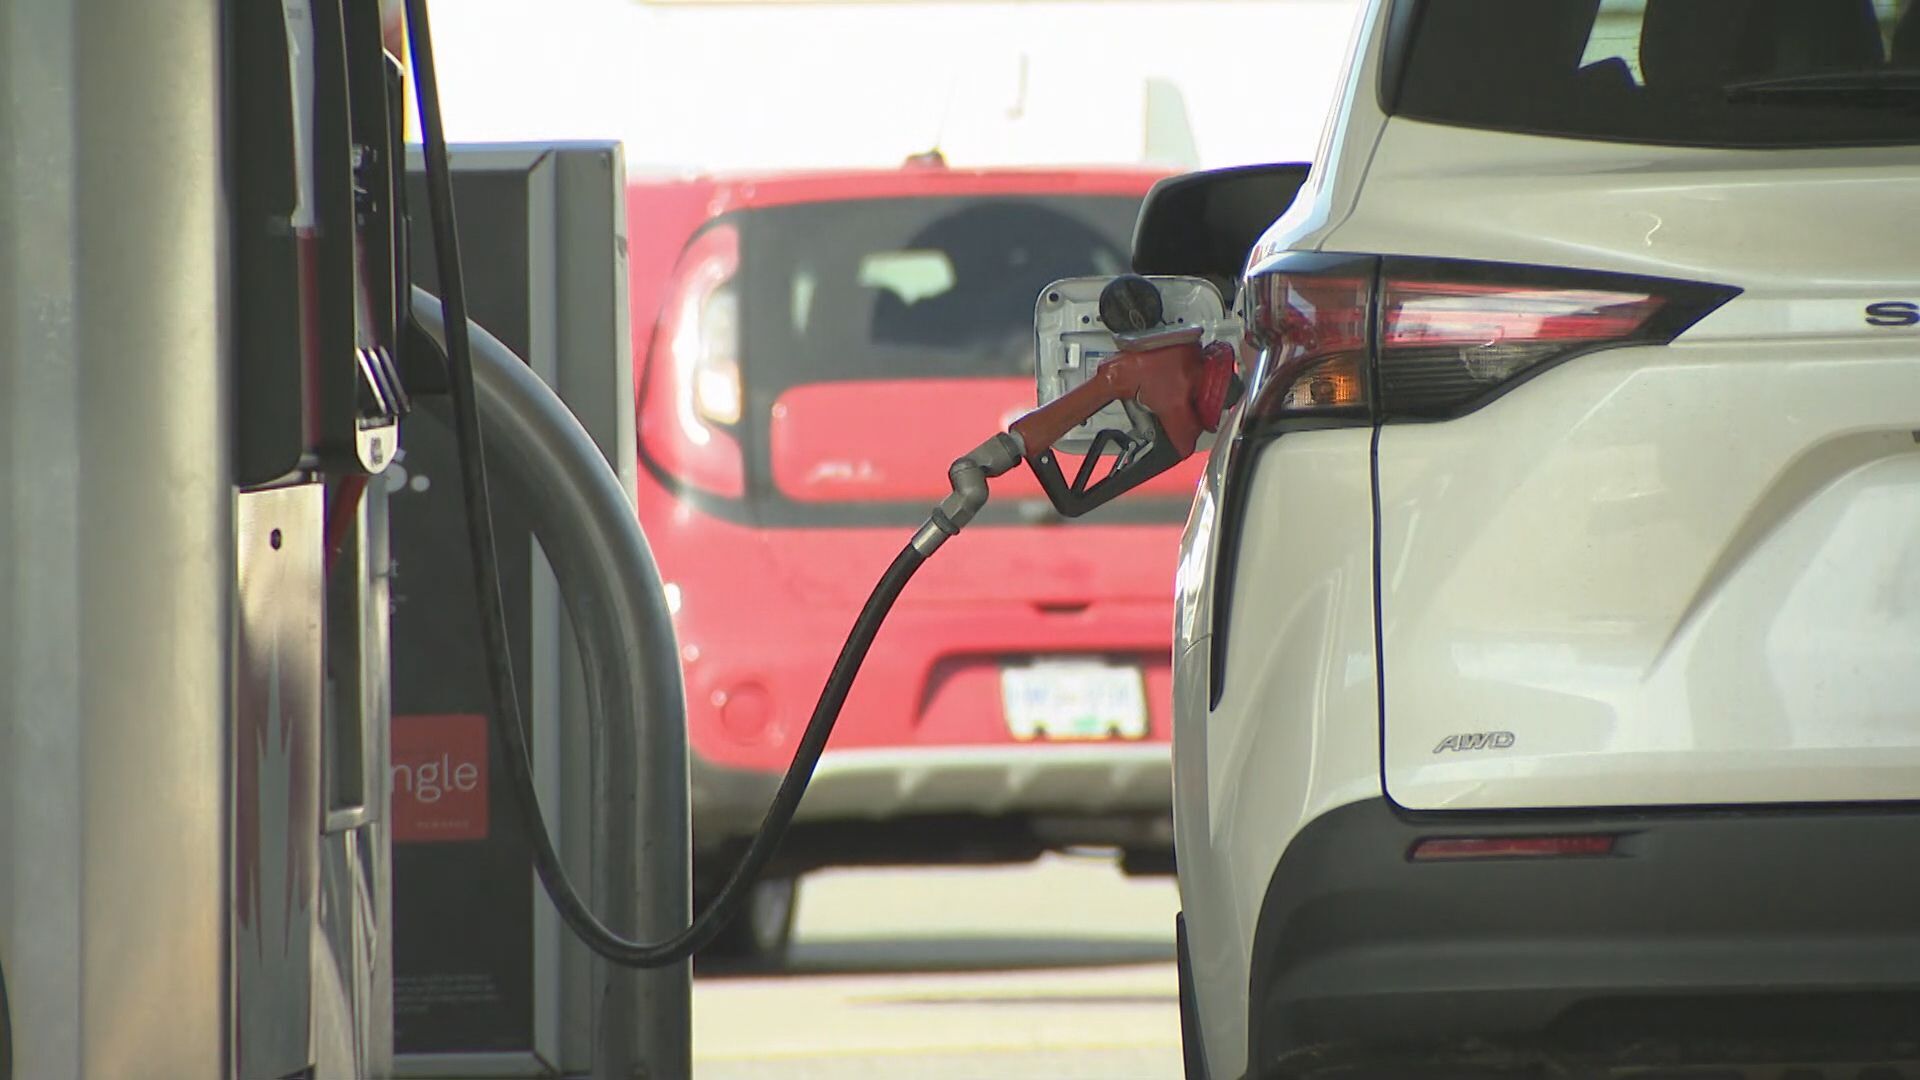 Many across Ontario will see a major jump in gas prices on Thursday